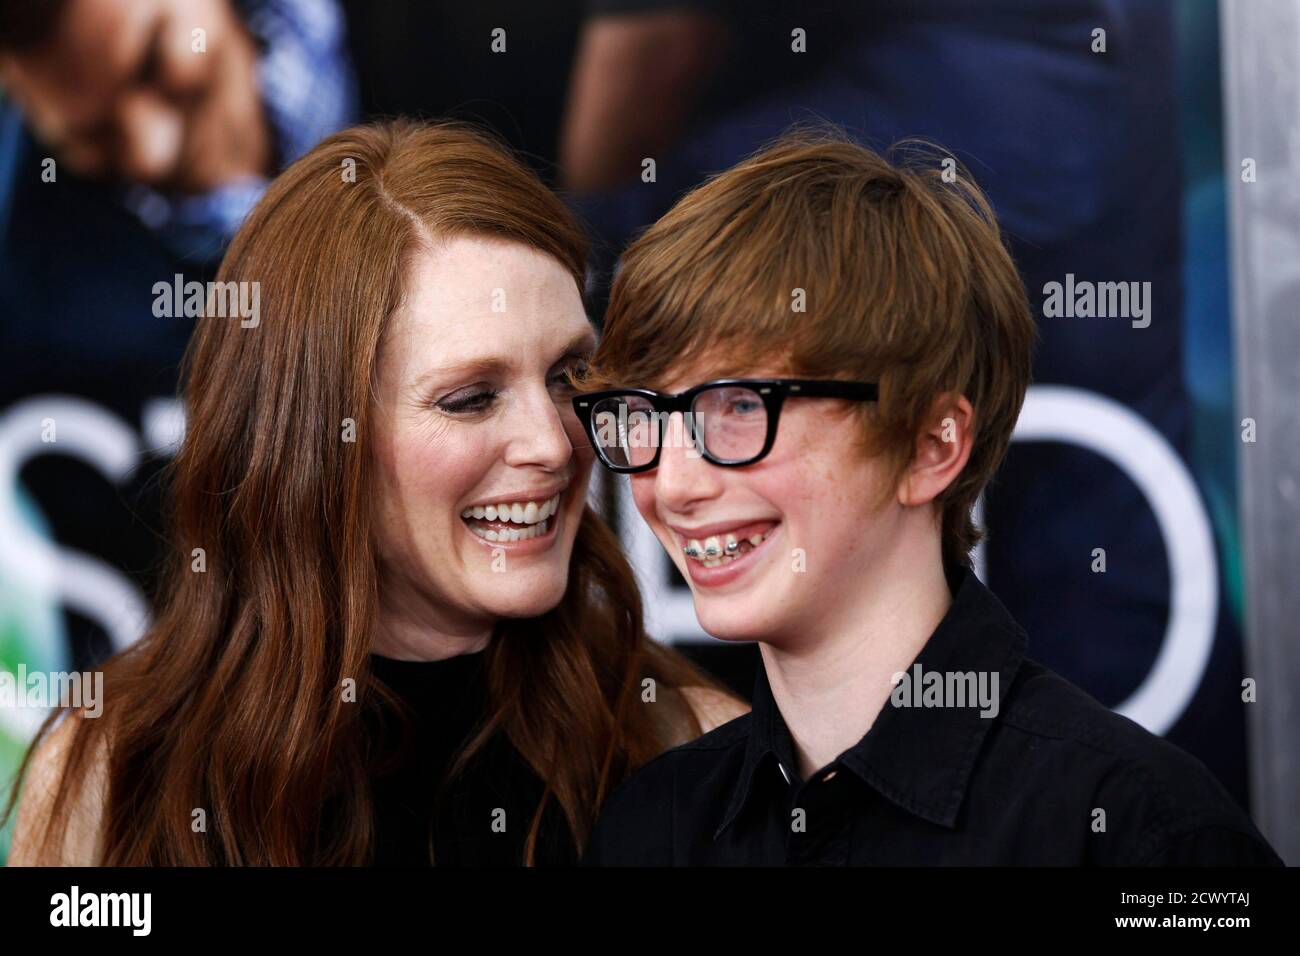 Cast member Julianne Moore arrives with her son, Caleb Freundlich, for the premiere of her film 'Crazy, Stupid, Love' in New York July 19, 2011.   REUTERS/Lucas Jackson (UNITED STATES - Tags: ENTERTAINMENT) Stock Photo